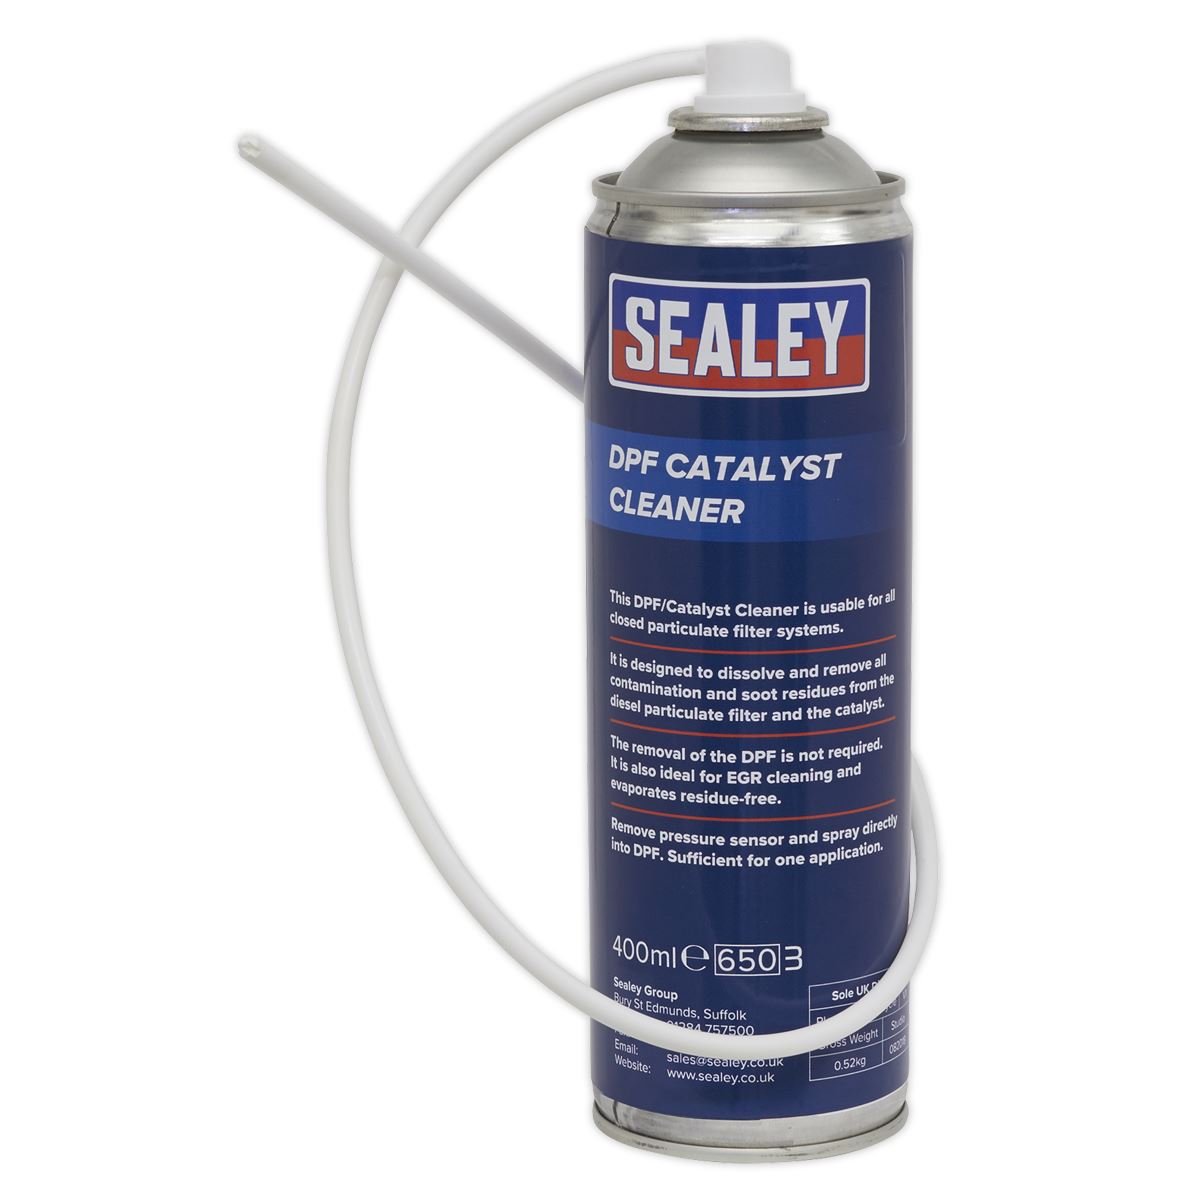 Sealey DPF Catalyst Cleaner